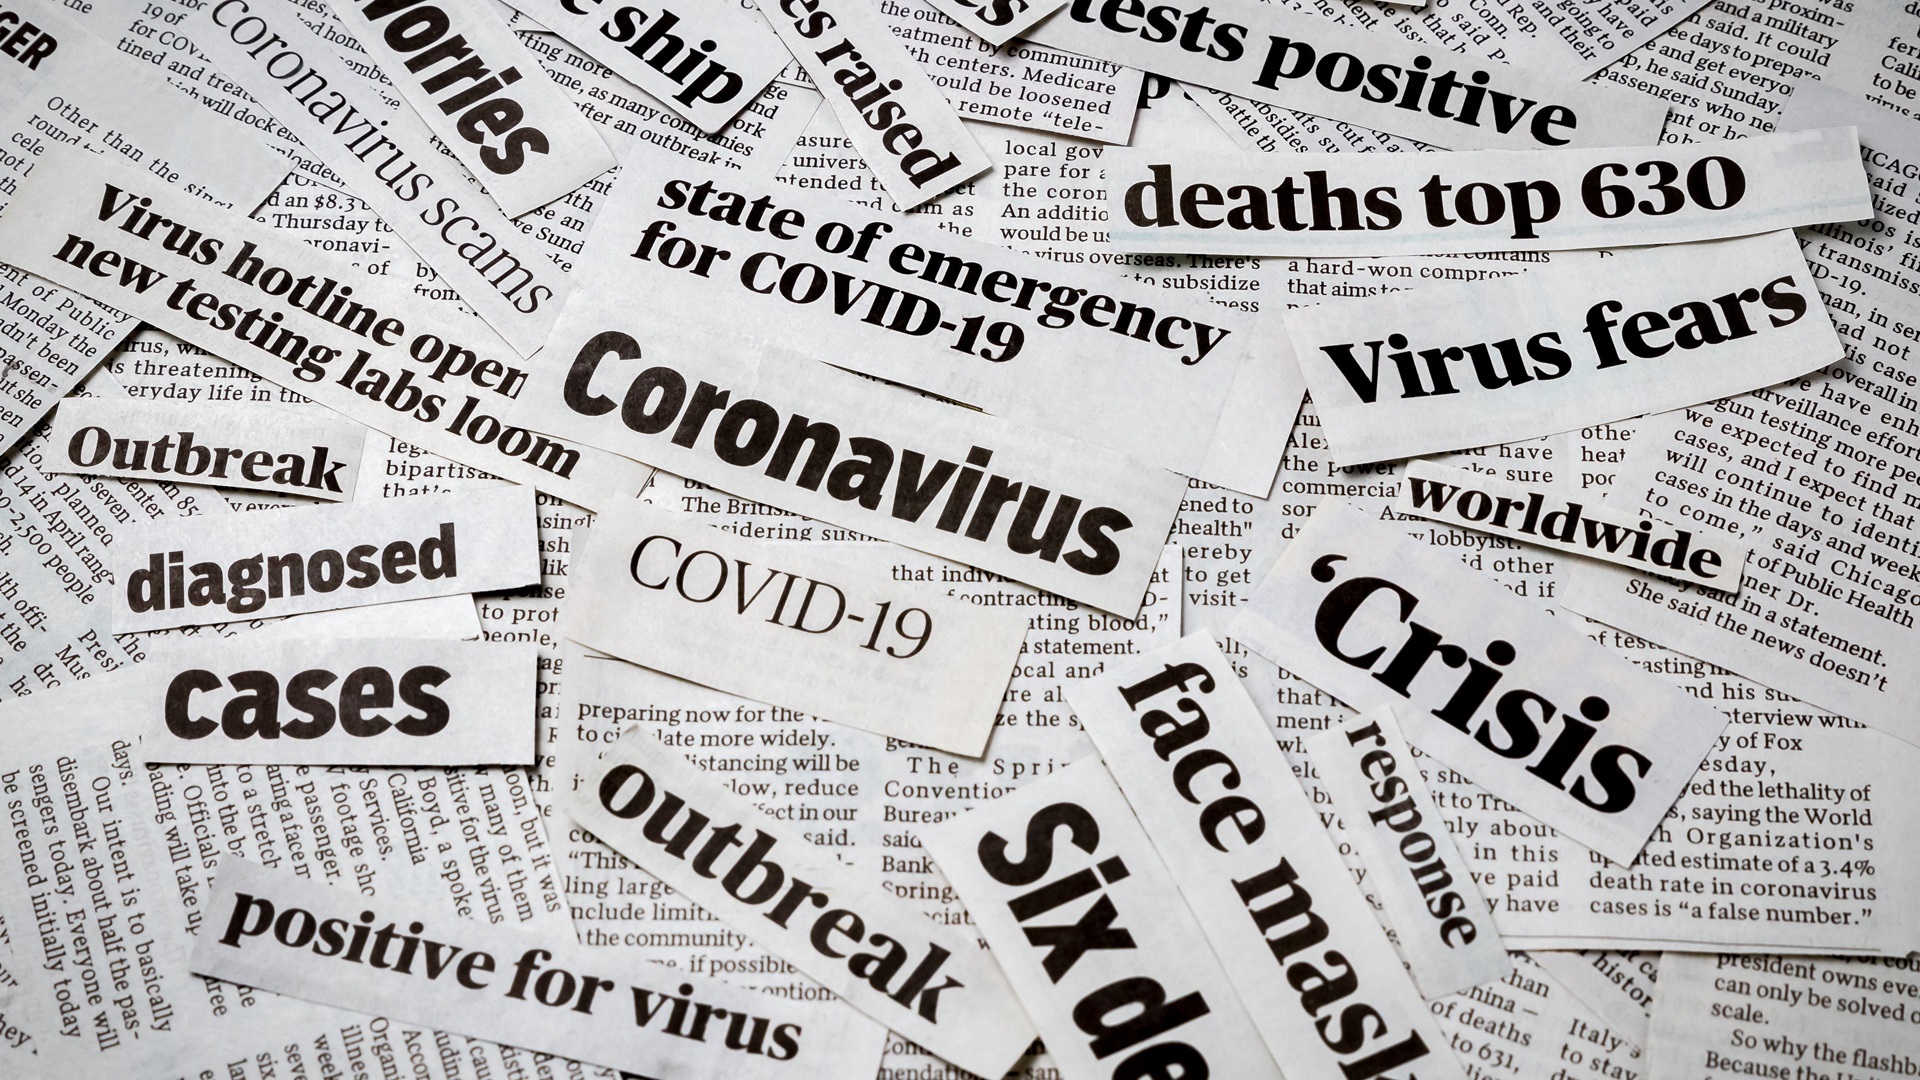 With all the information circulating about coronavirus disease 2019 (COVID-19), it’s important we separate myths from reality.